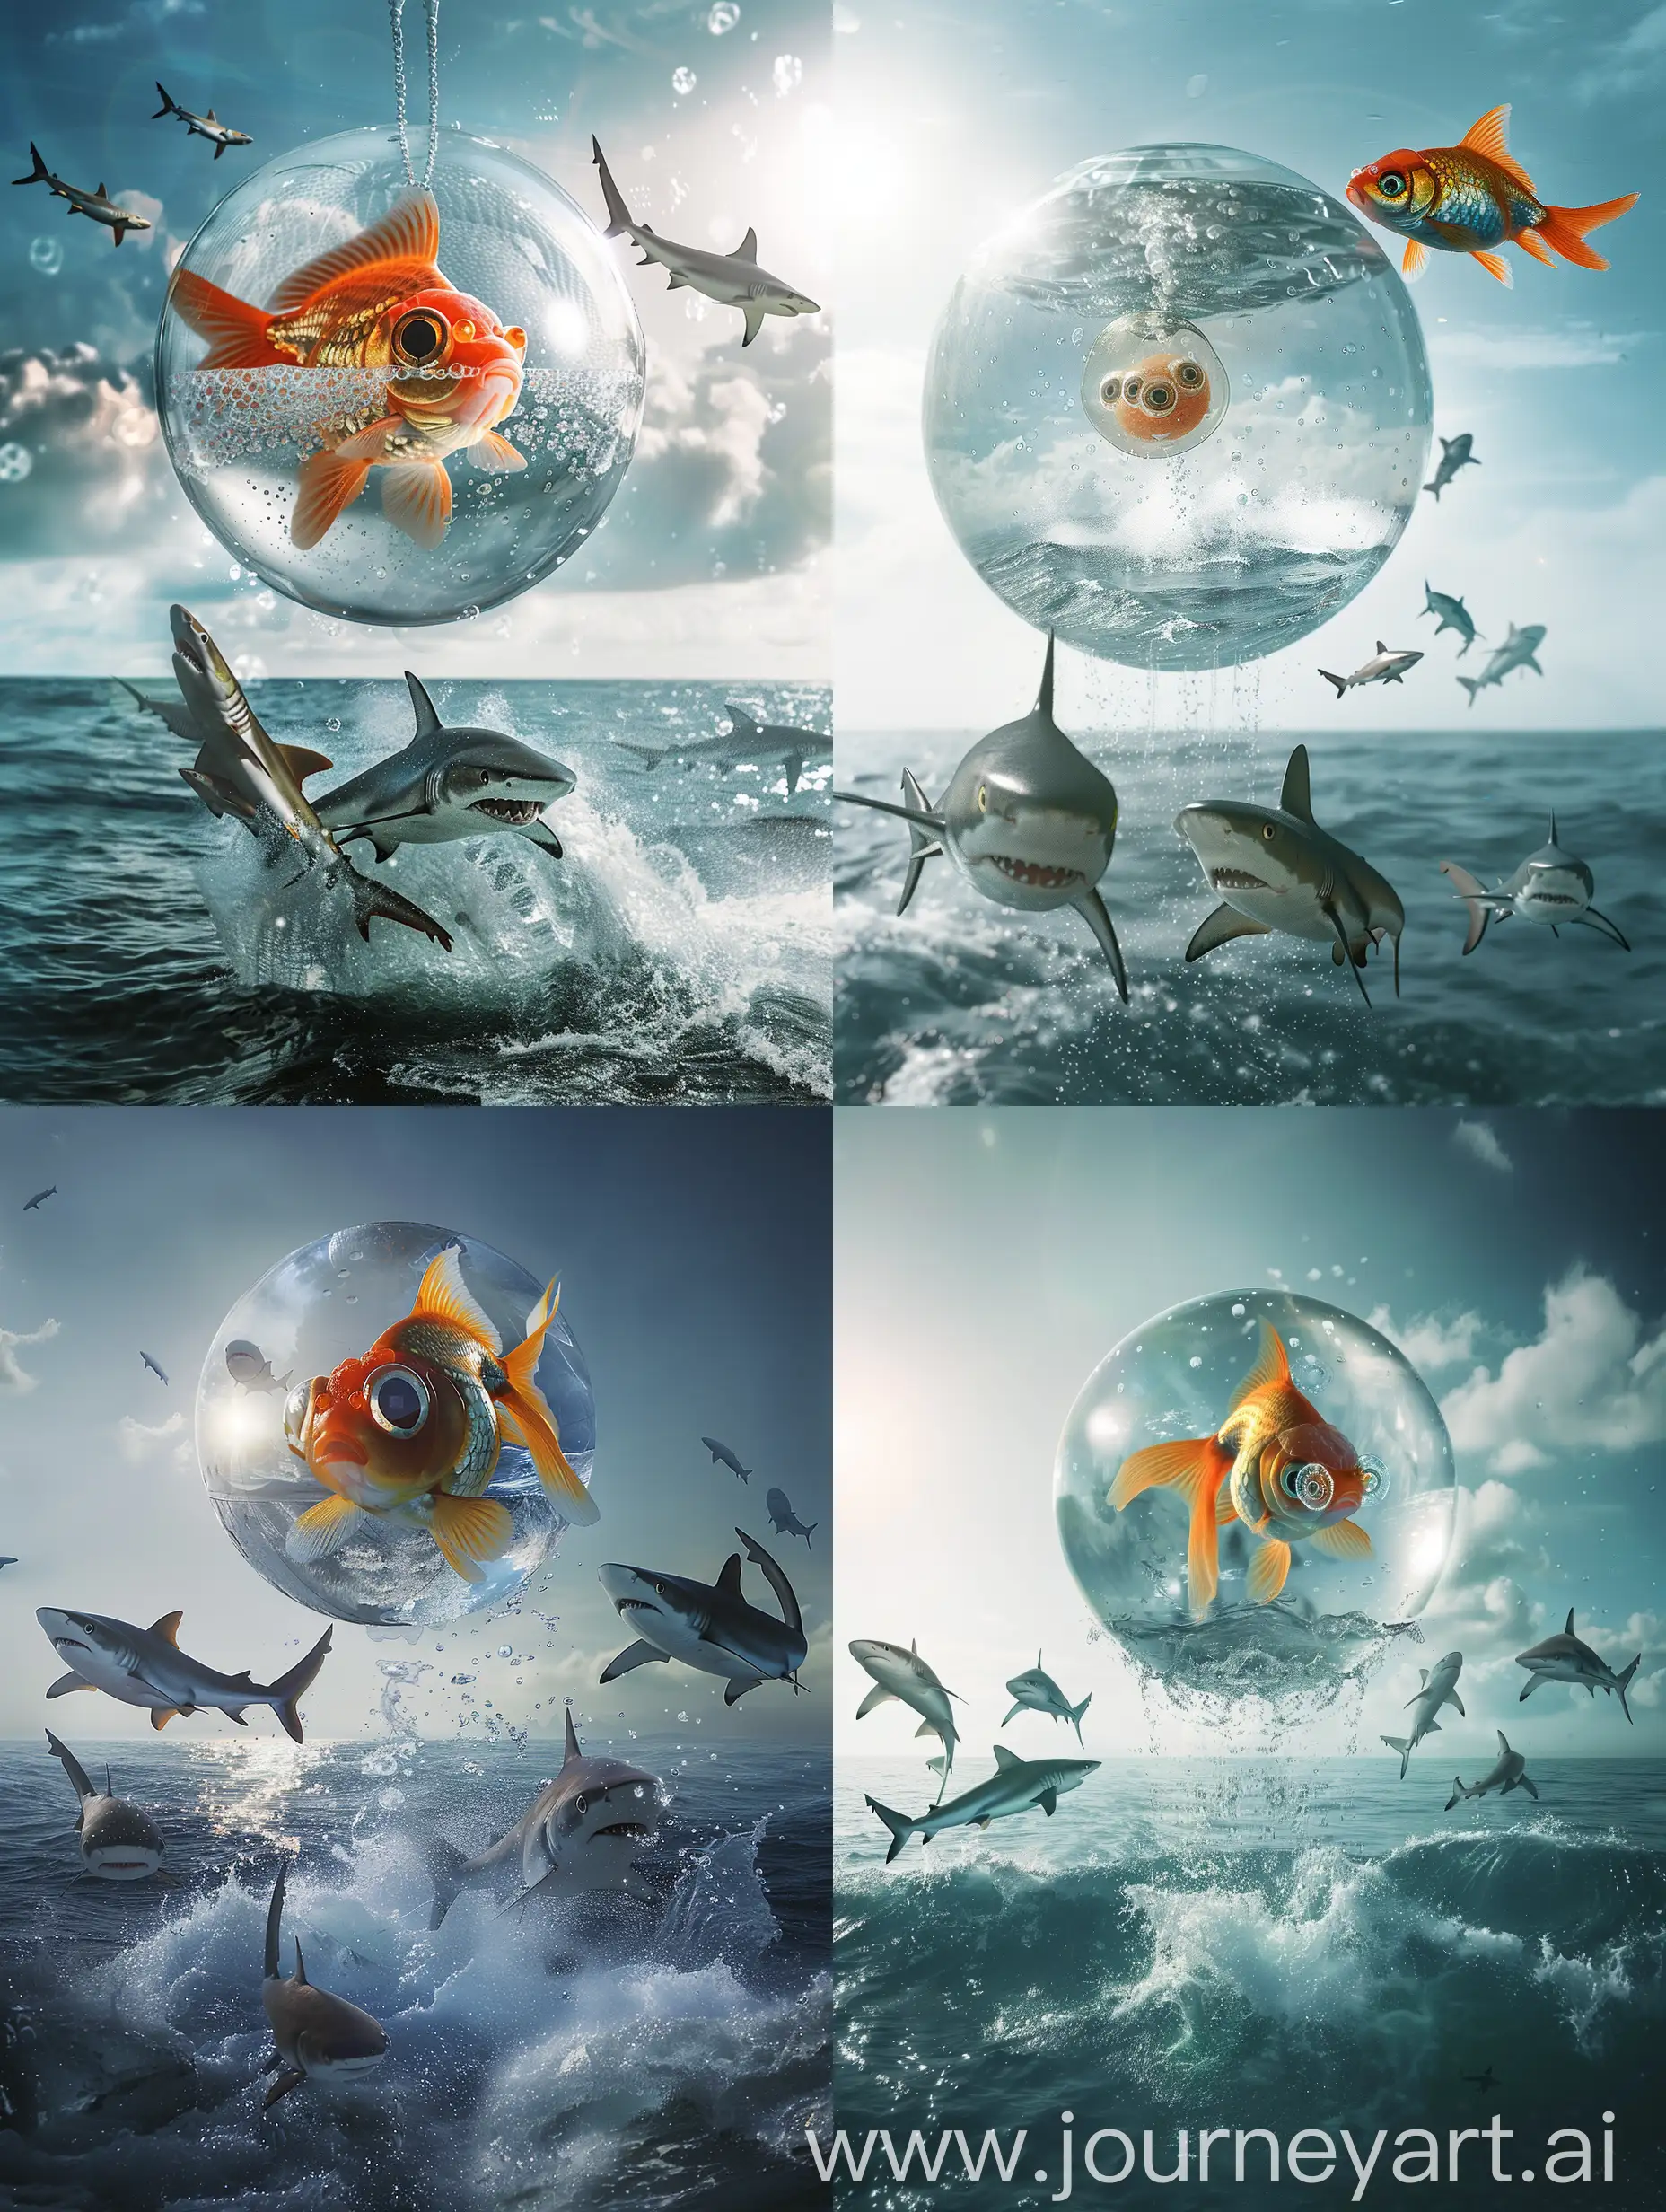 Photo of a scene with stark contrasts at the highest resolution. Centered is a large clear glass sphere, holding a bubble eye goldfish, identifiable by the fluid-filled sacs under its eyes. Suspended high above the ocean, this peaceful setting is contrasted by the sharks jumping out of the water beneath. The scene is brightly lit by the overhead noon sun, drawing attention to the goldfish’s unique look and the sharks’ vigorous leaps.